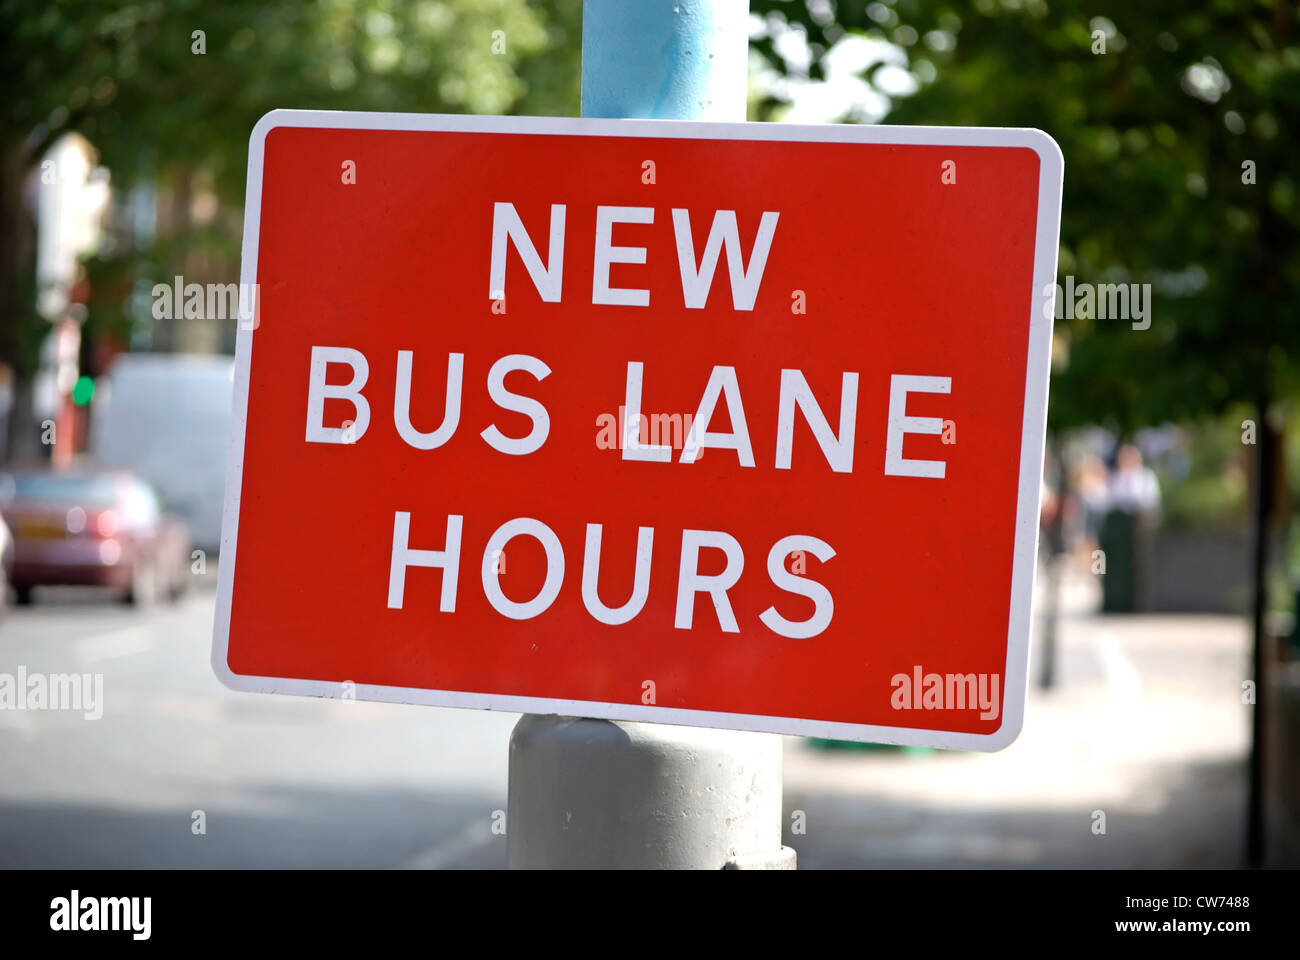 new bus lane hours sign in chiswick, london, england Stock Photo